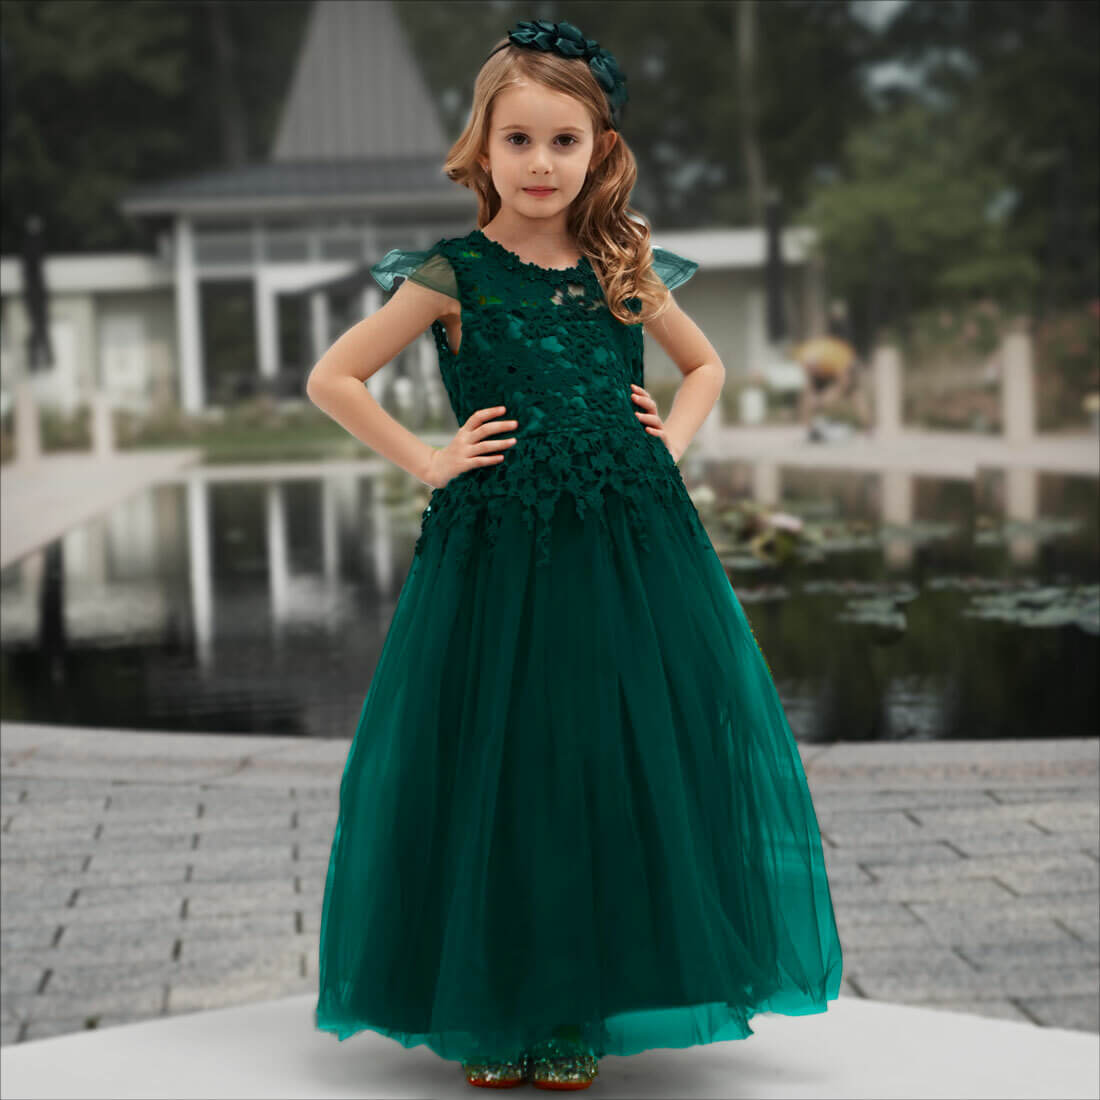 Girl in a green gown